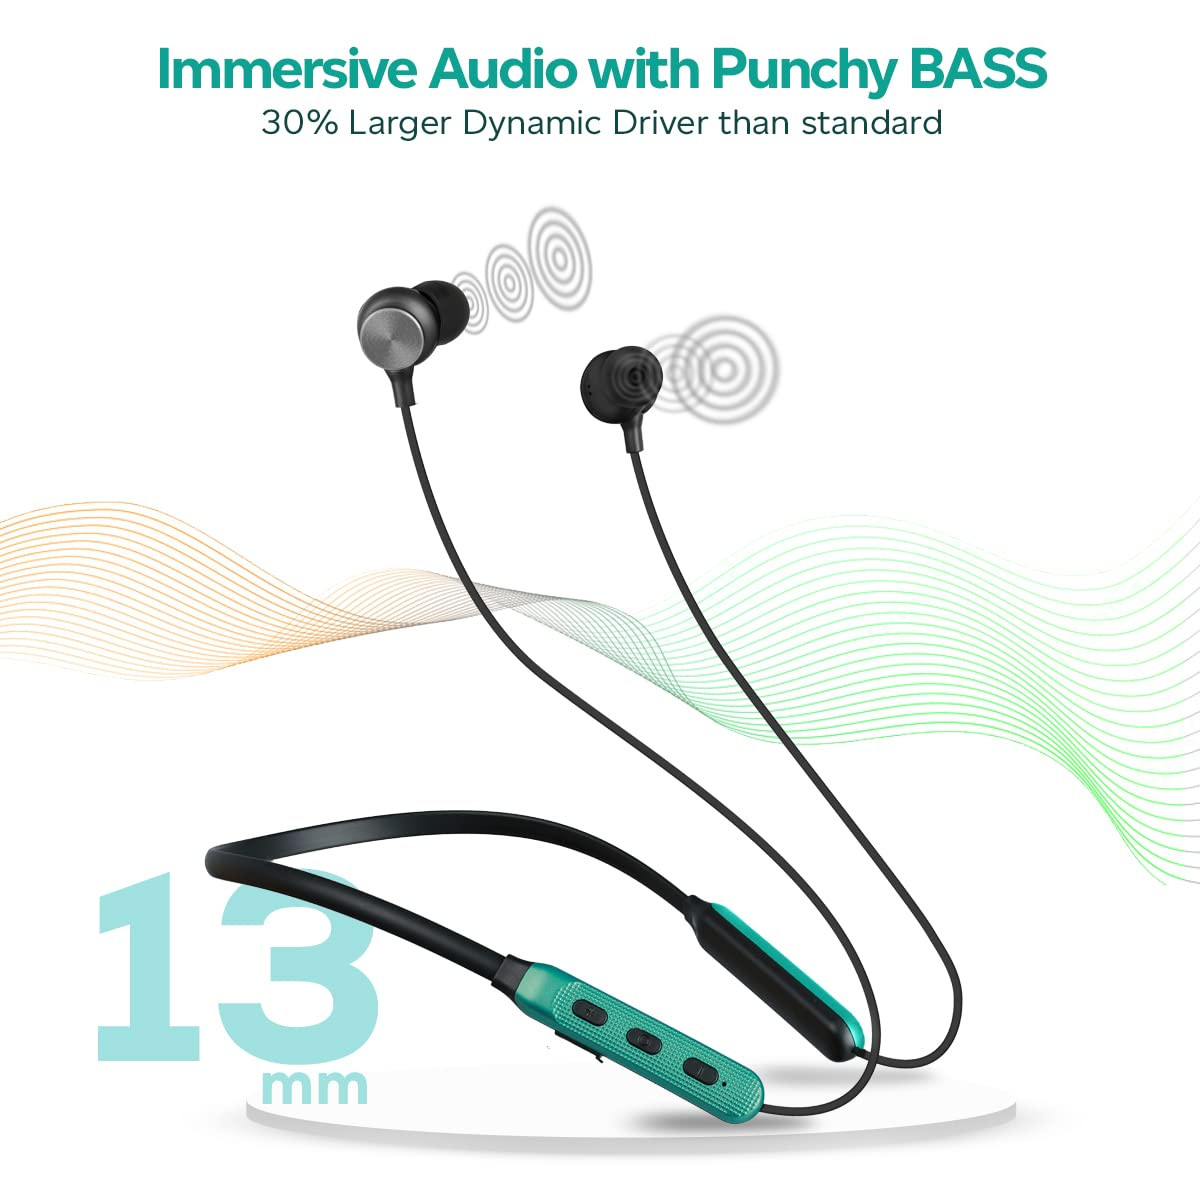 pTron Tangent Duo Bluetooth 52 Wireless in Ear Headphones 13mm Driver Deep Bass HD Calls Fast Charging Type-C Neckband Dual Pairing Voice Assistant  IPX4 Water Resistant BlackGreen